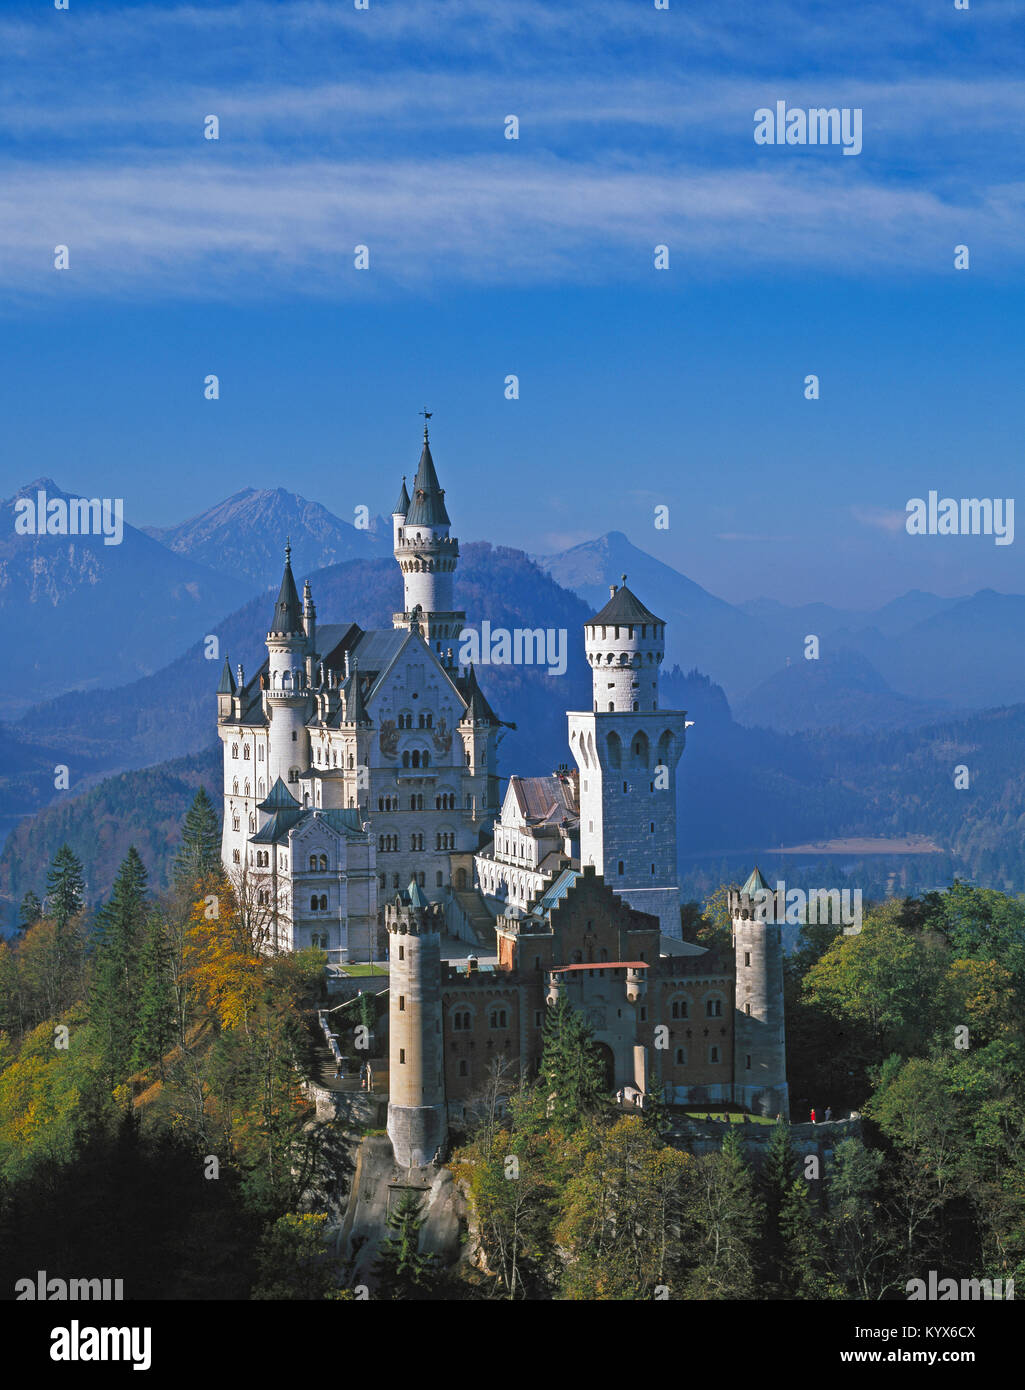 German Fairytale Castle Hi Res Stock Photography And Images Alamy